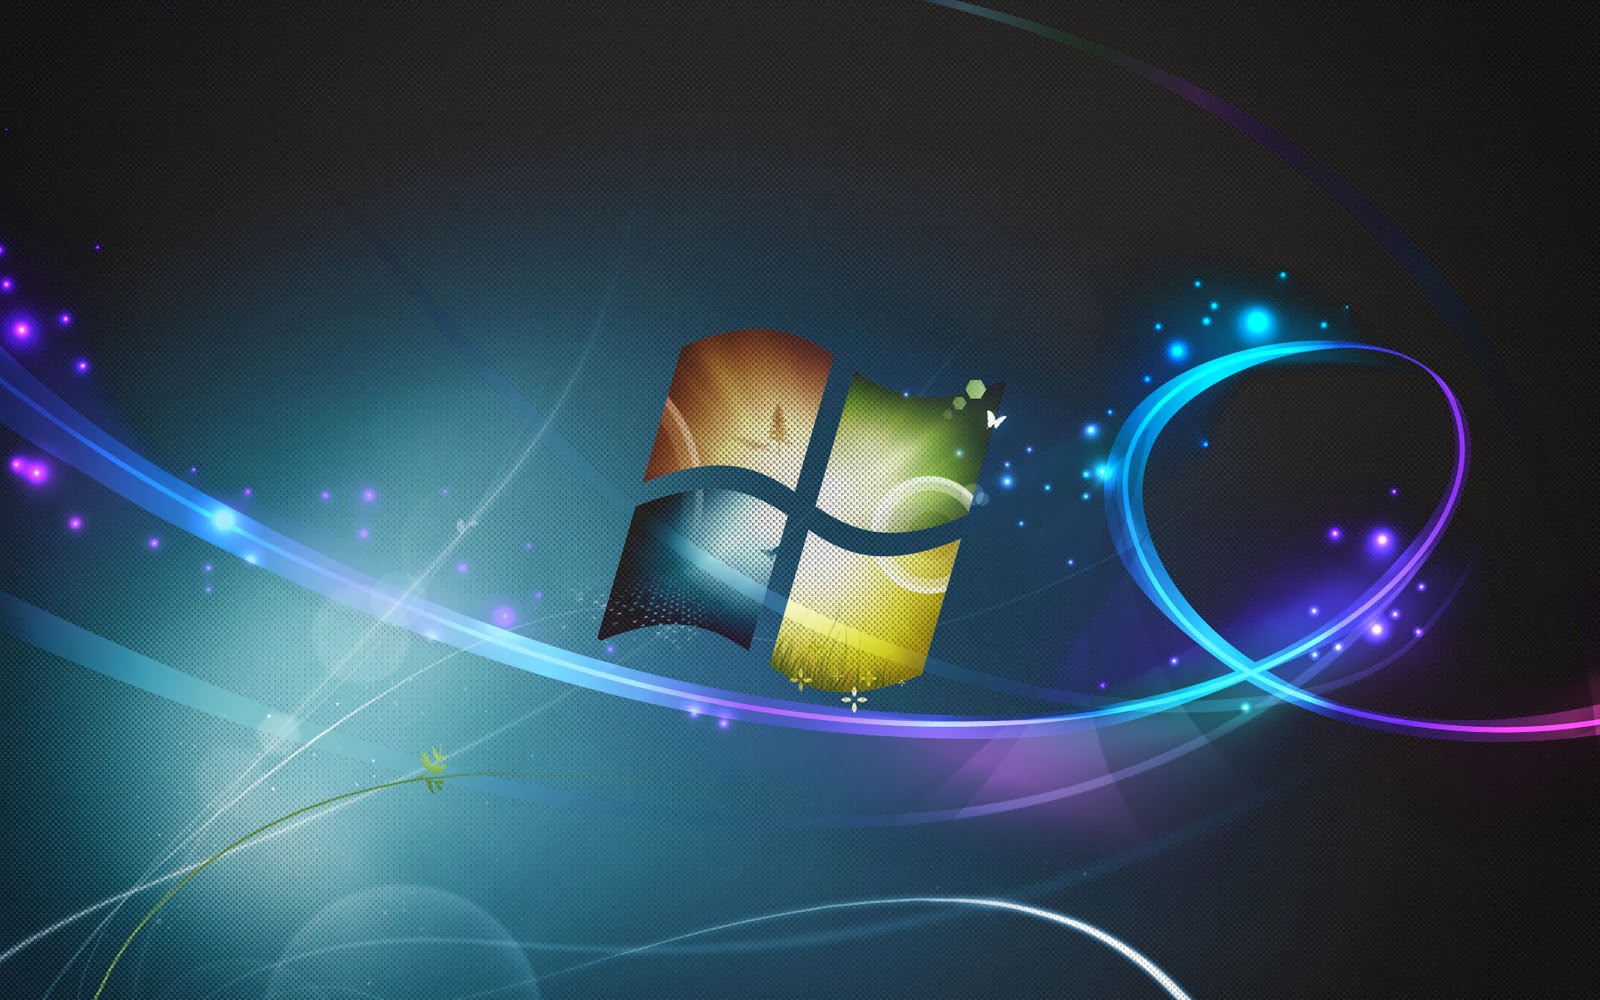 Windows Abstract Wallpapers